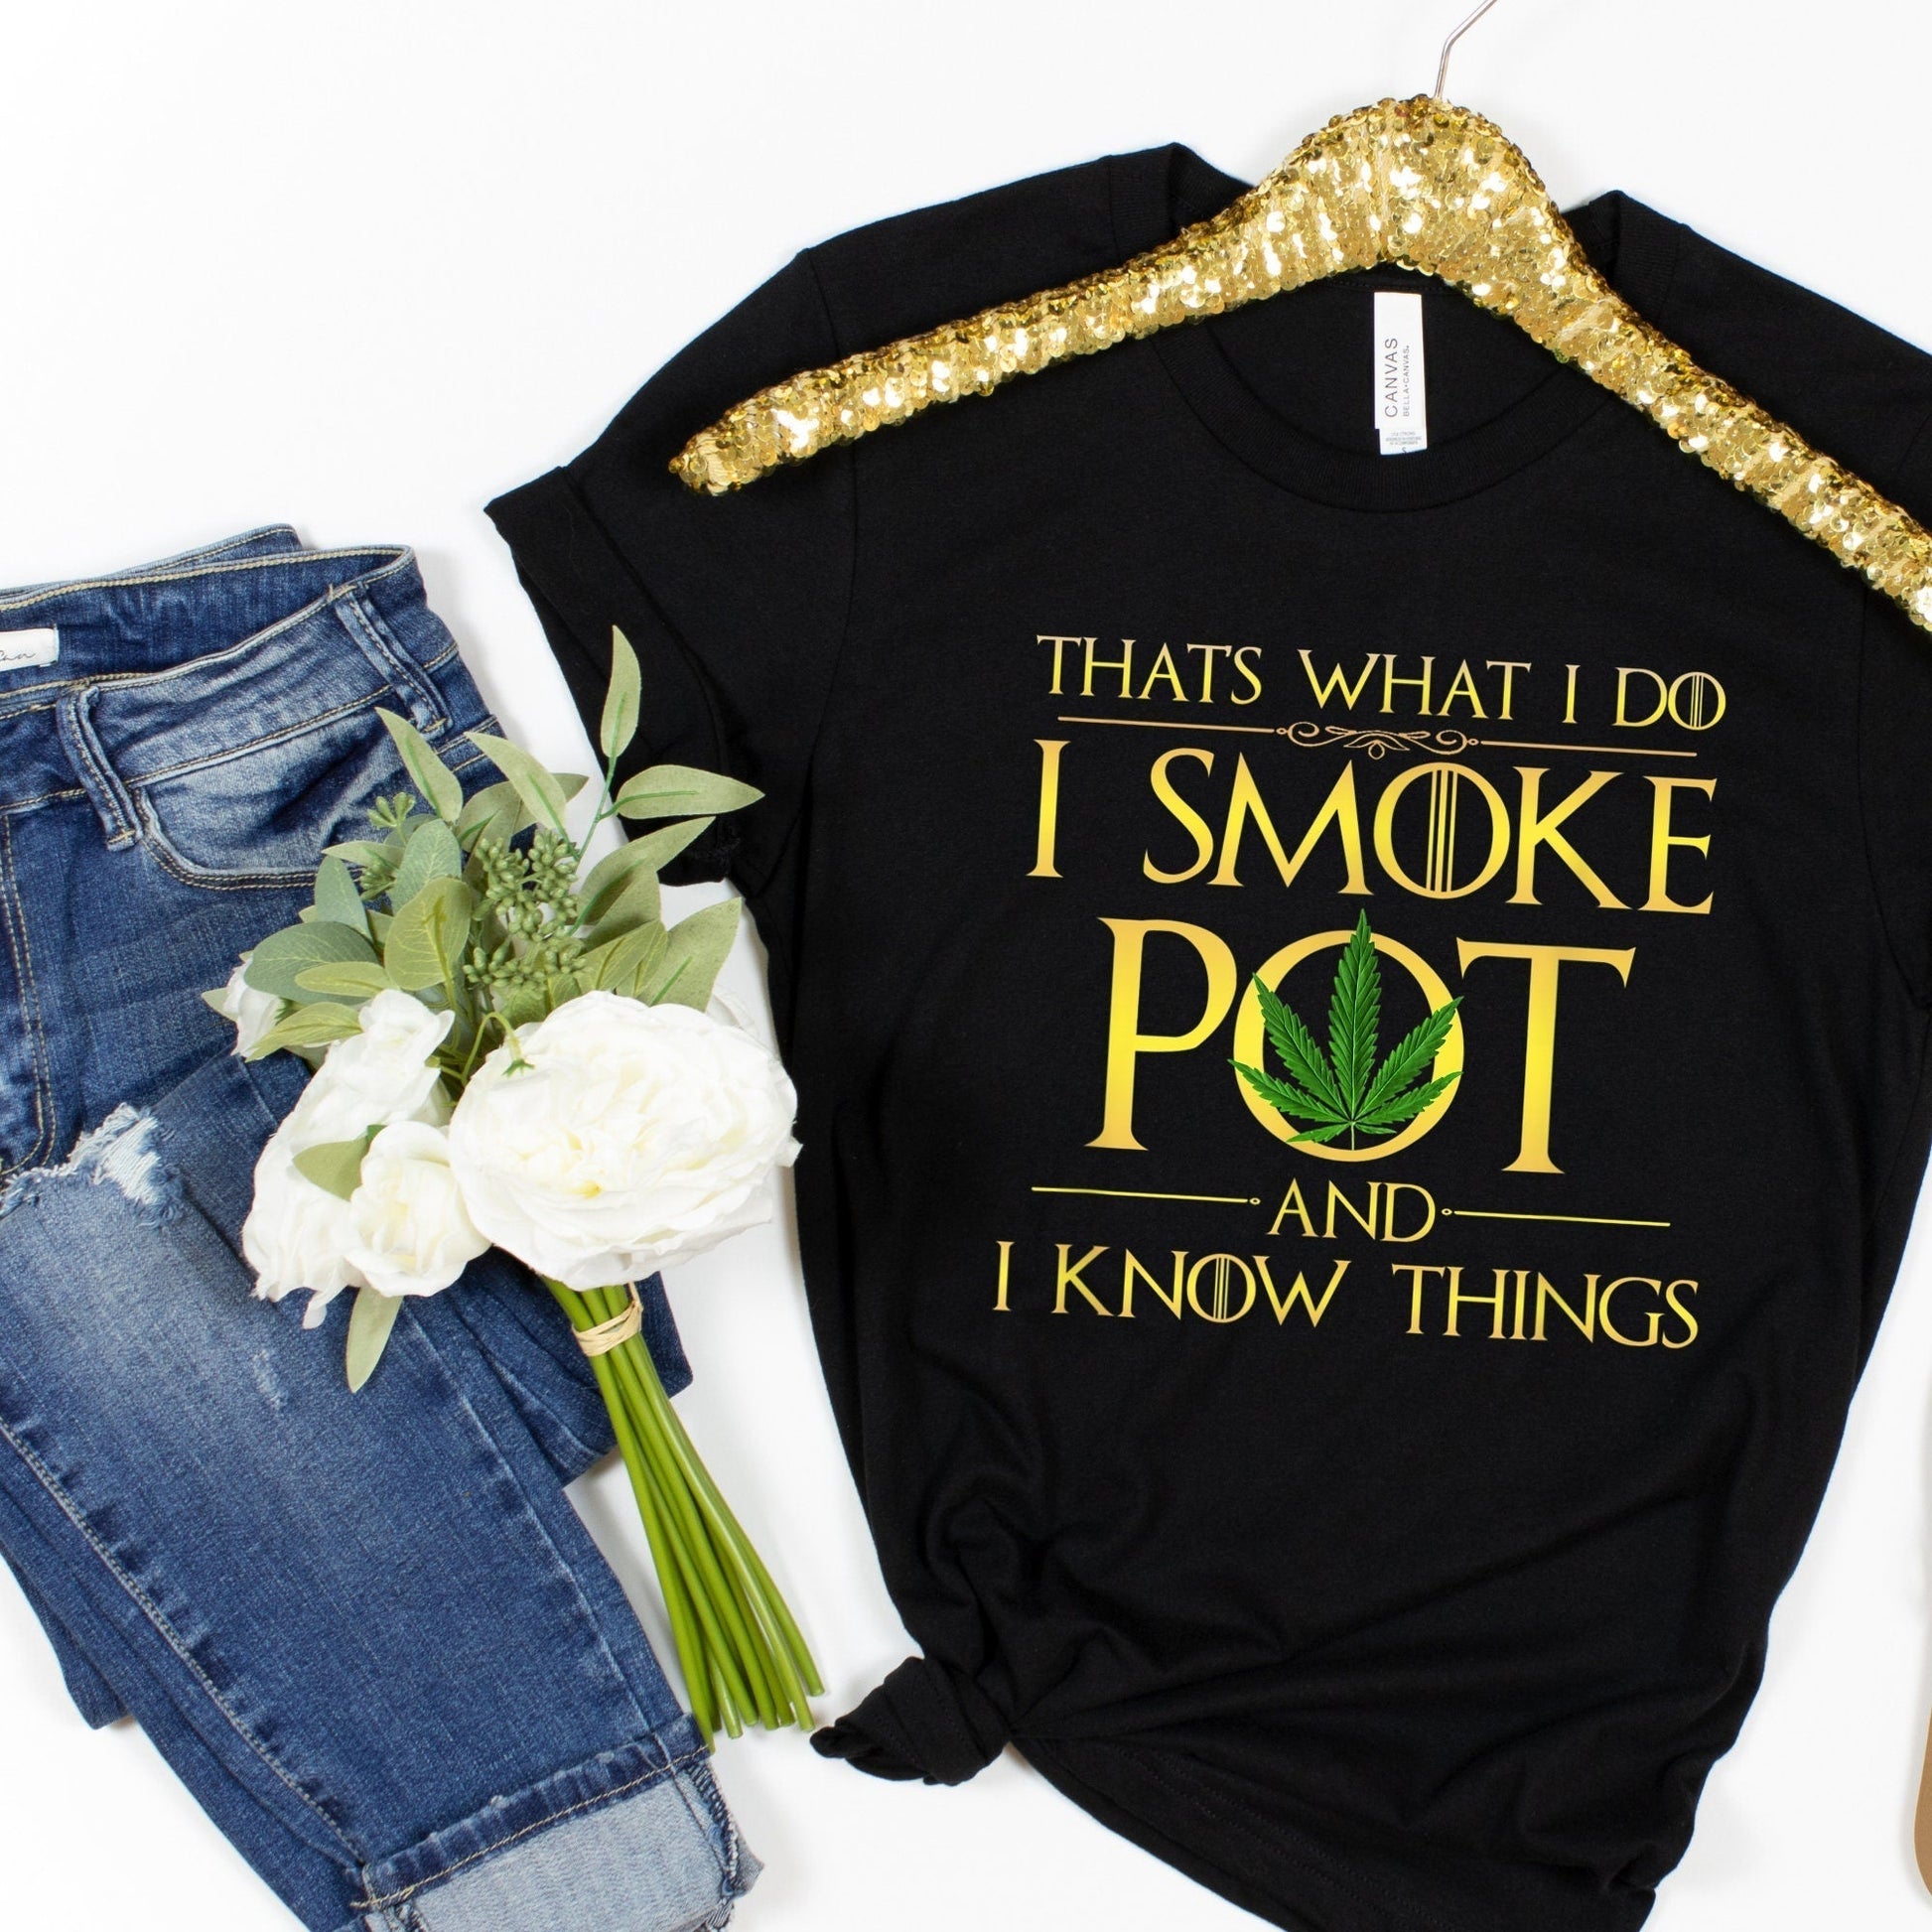 That's What I Do, I Smoke Pot and Know Things, Funny Stoner Shirt HMDesignStudioUS